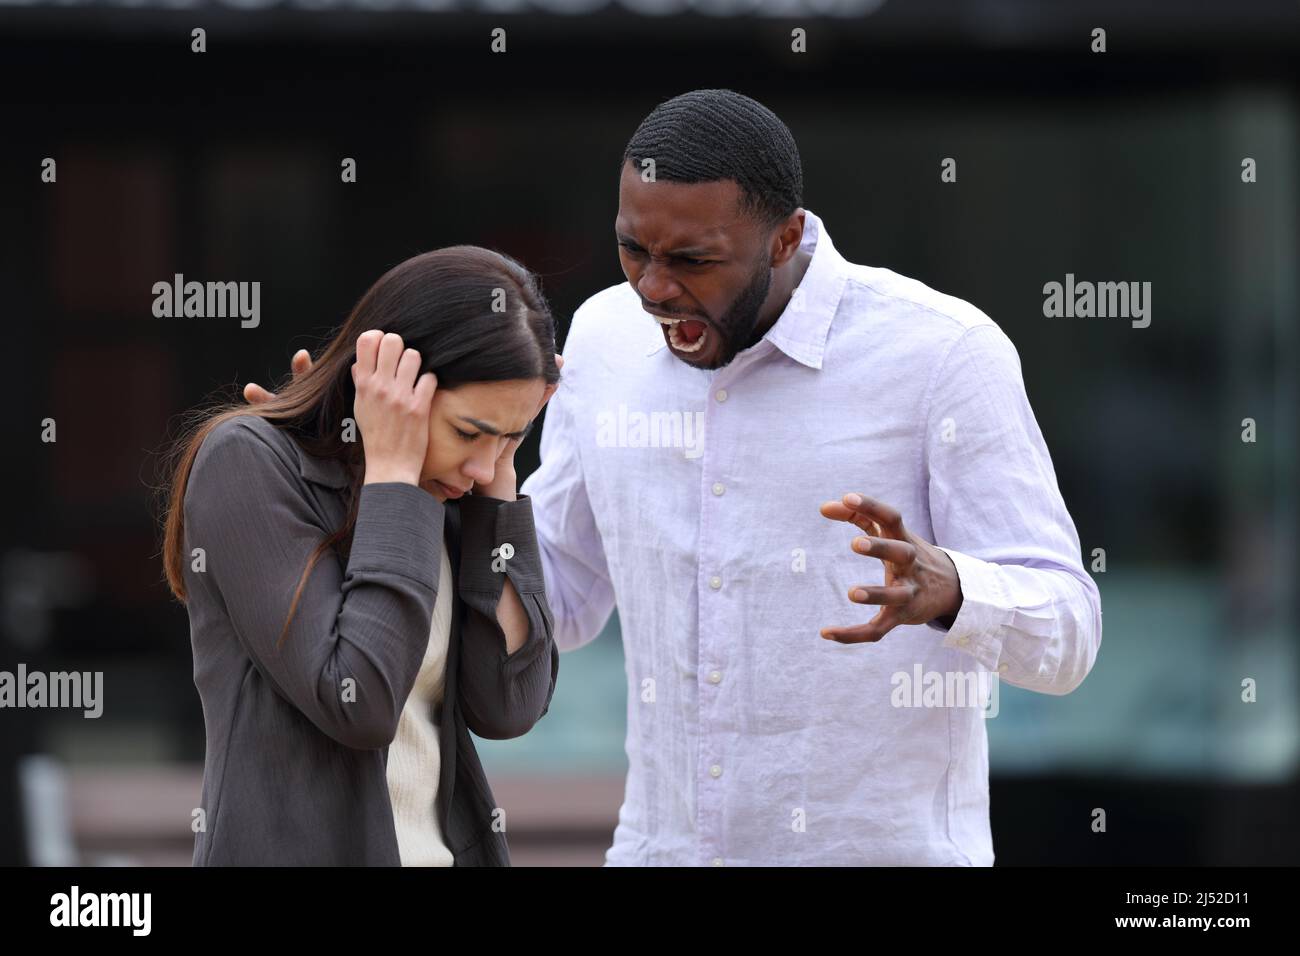 Angry man scolding and shouting to a scared woman in the street Stock Photo